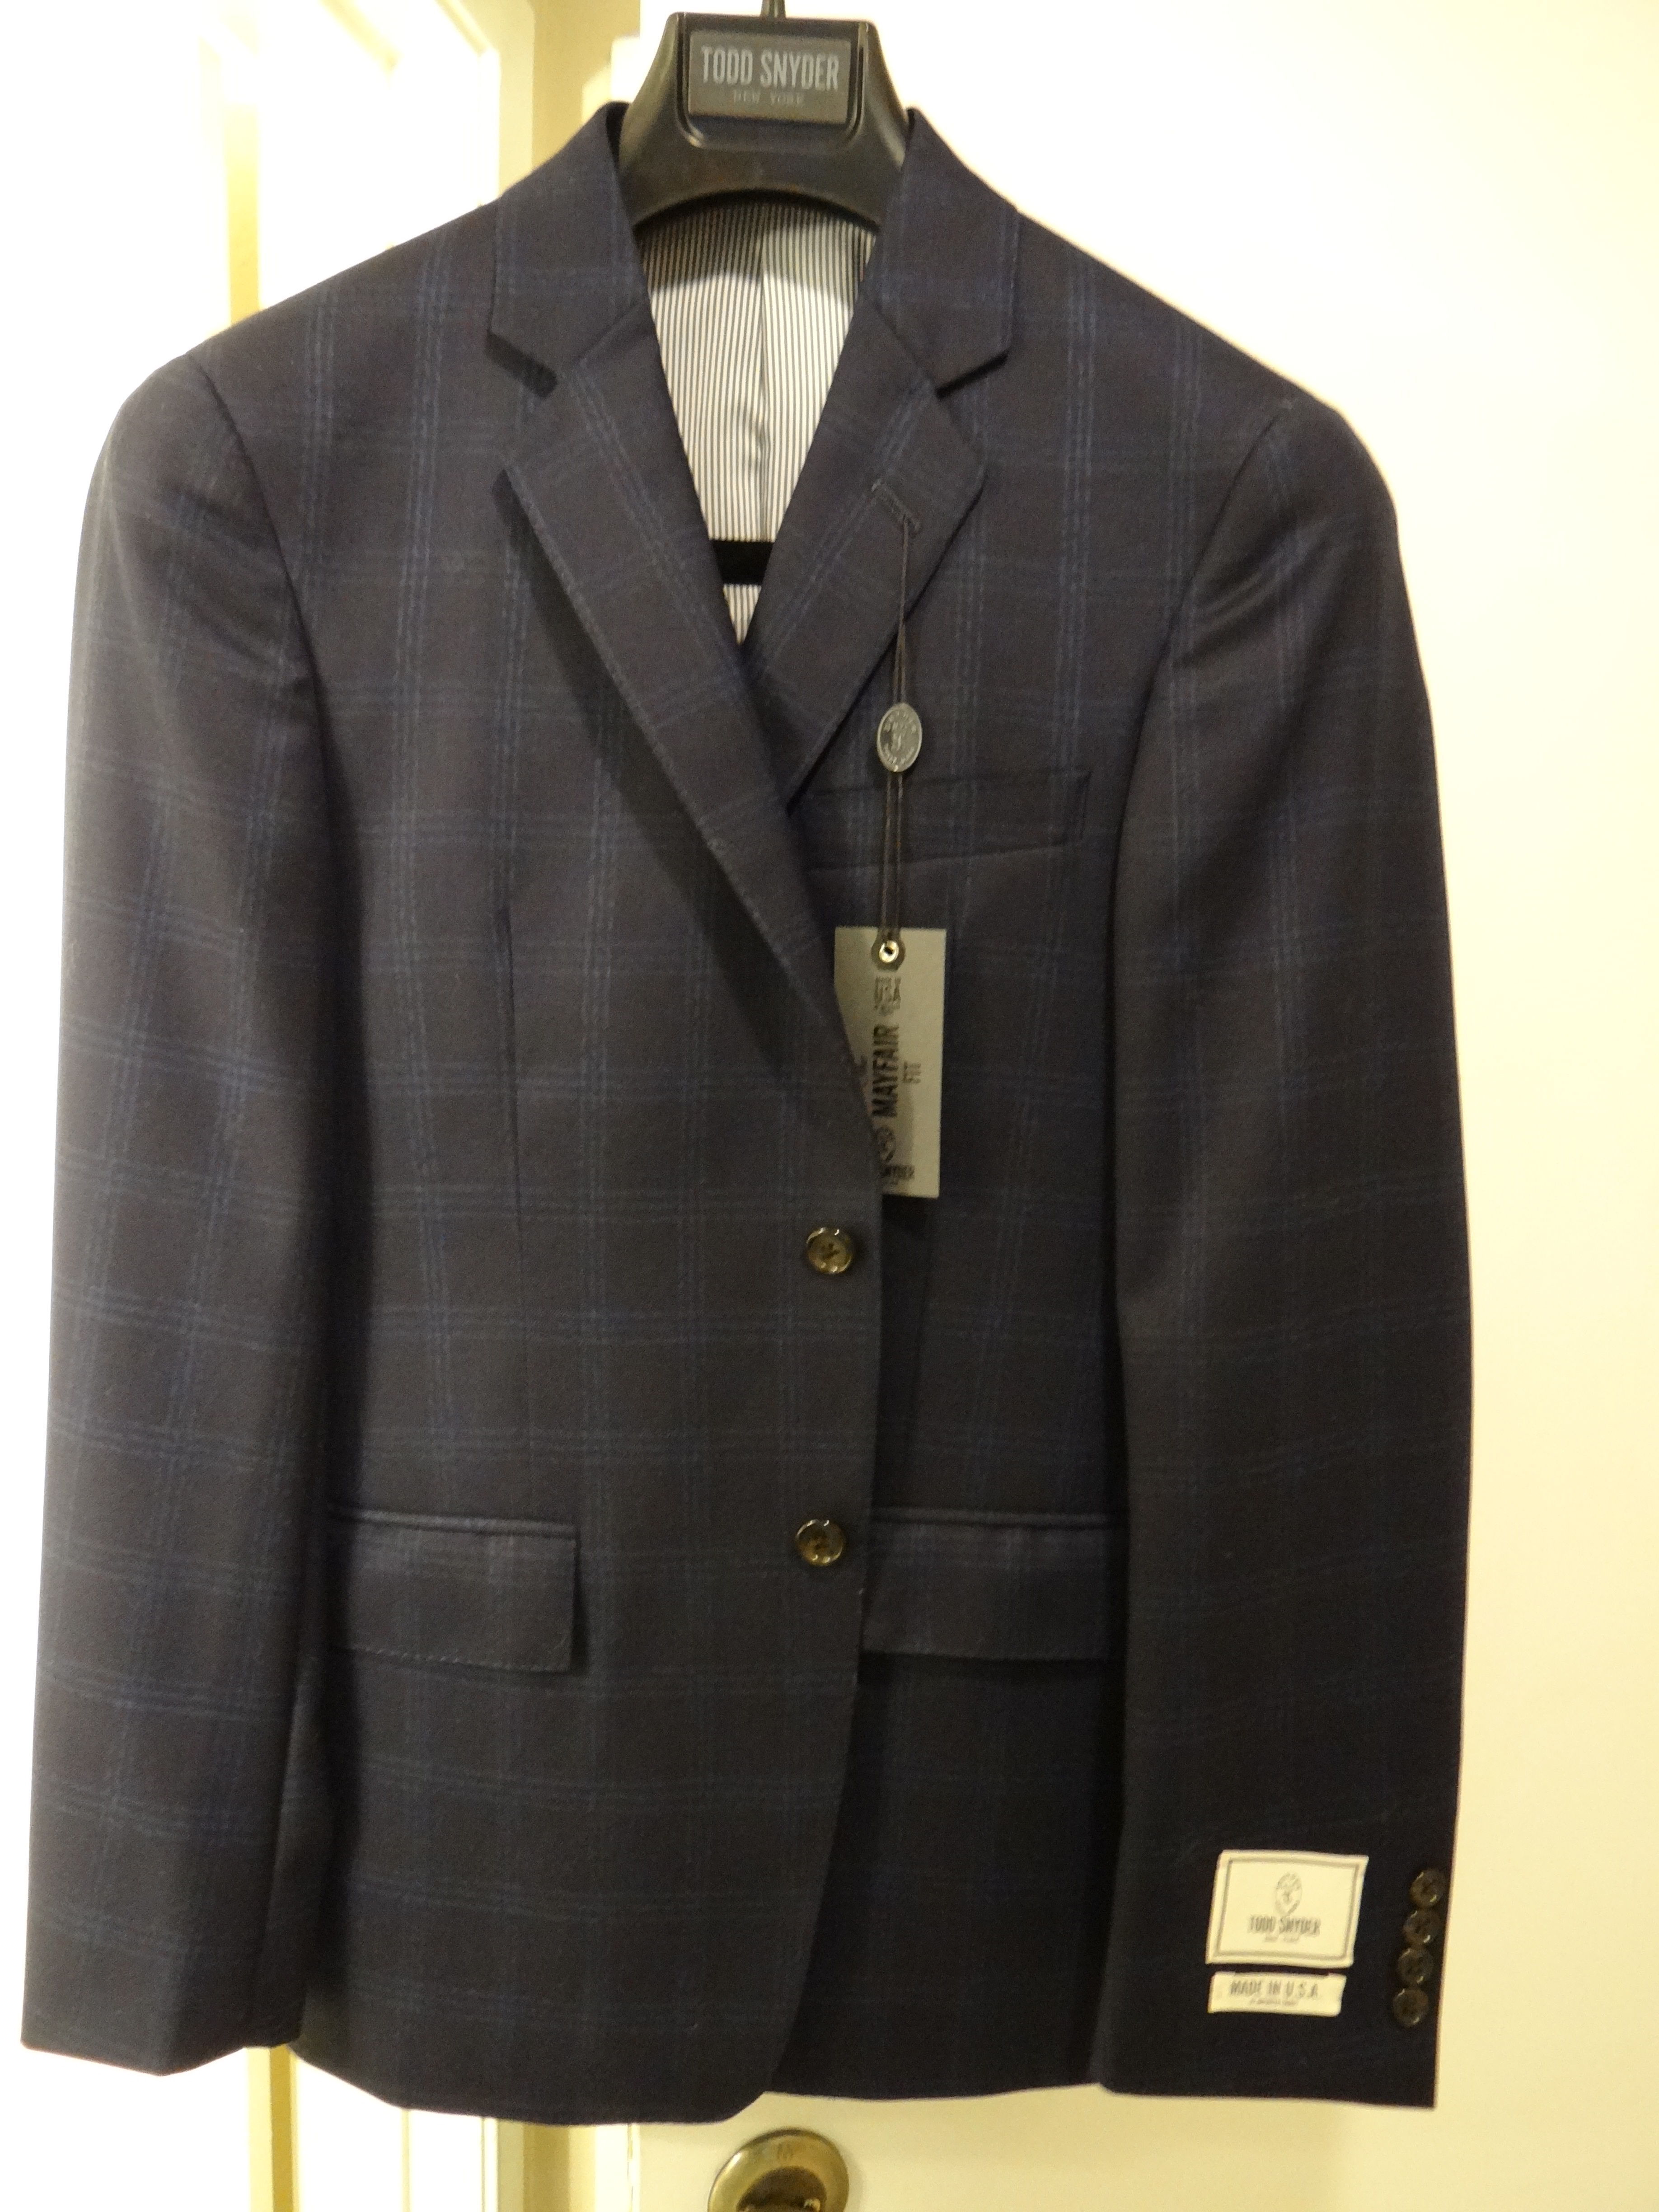 4/20 FURTHER PRICE DROP! Inexpensive NWT Navy Blue Sport Coats ...